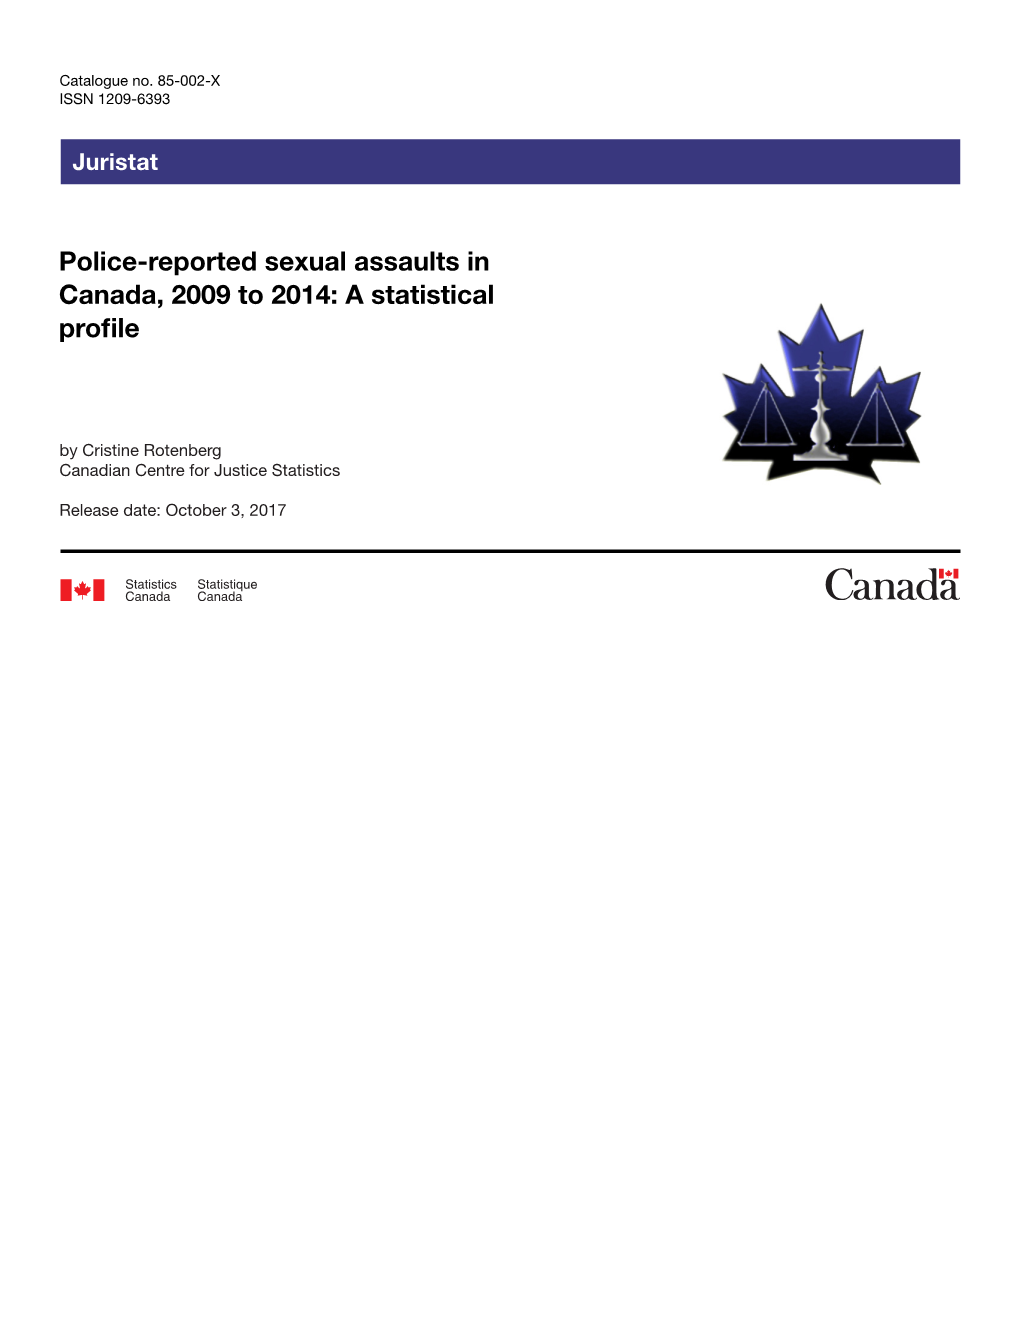 Police-Reported Sexual Assaults in Canada, 2009 to 2014: a Statistical Profile